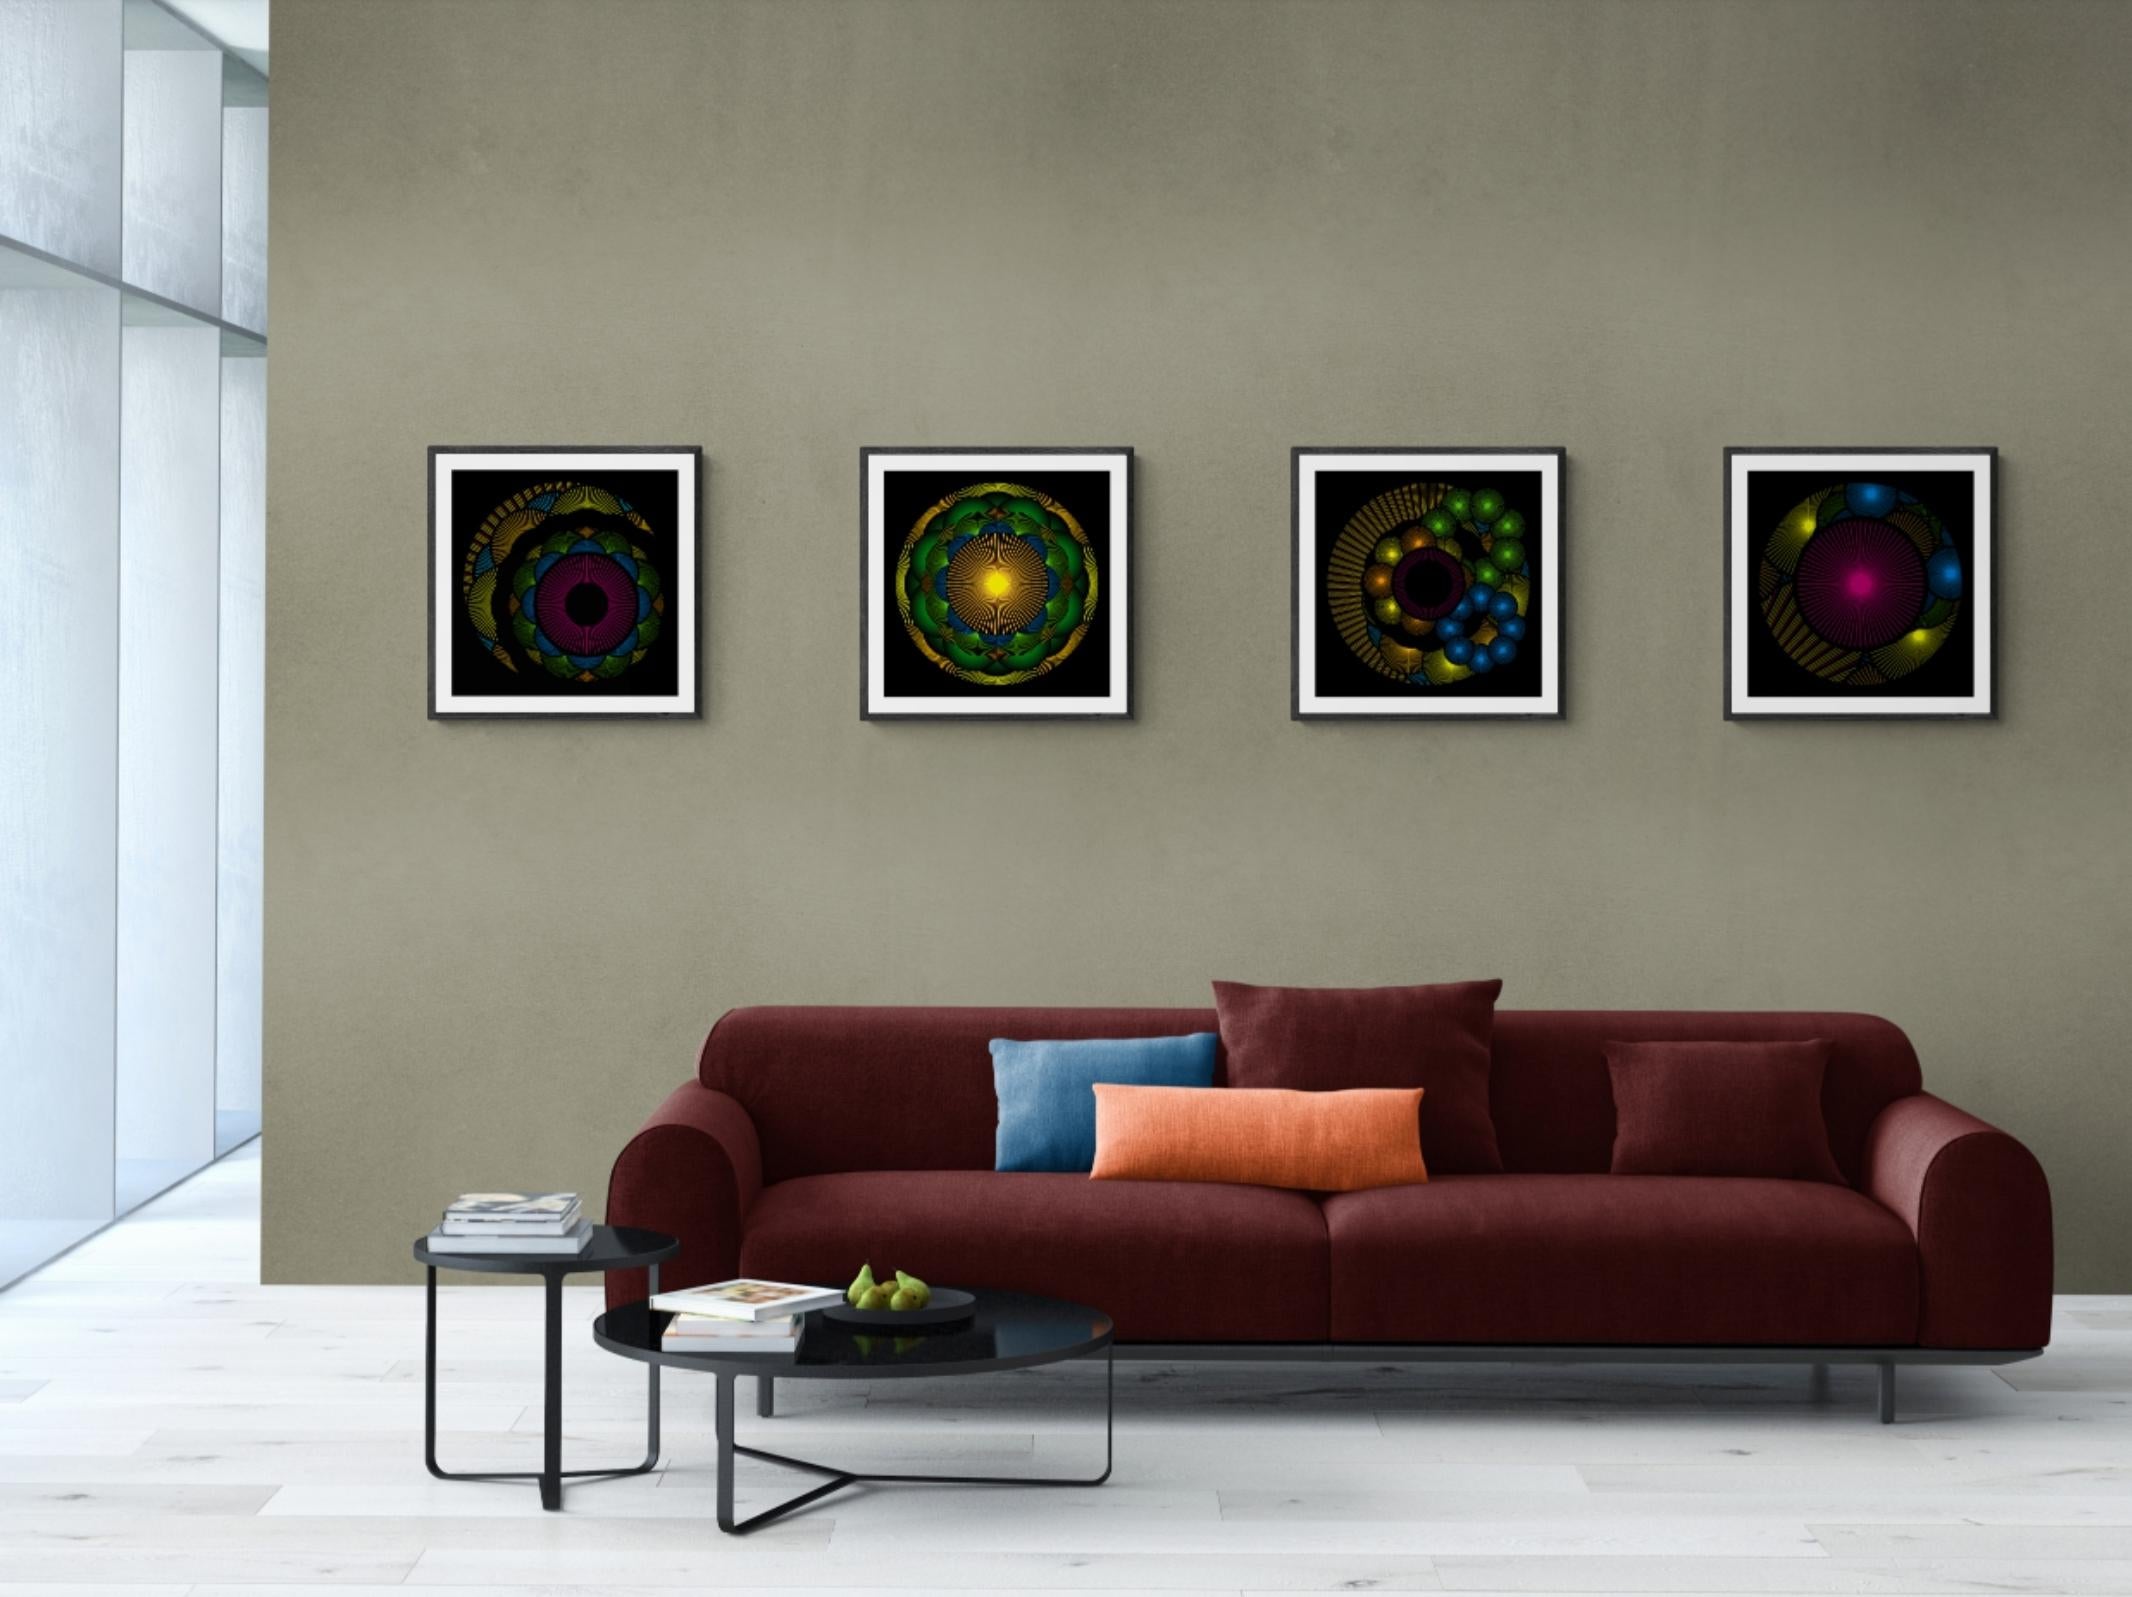 Nebulosa 35 - Abstract Geometric Print by Julio Campos